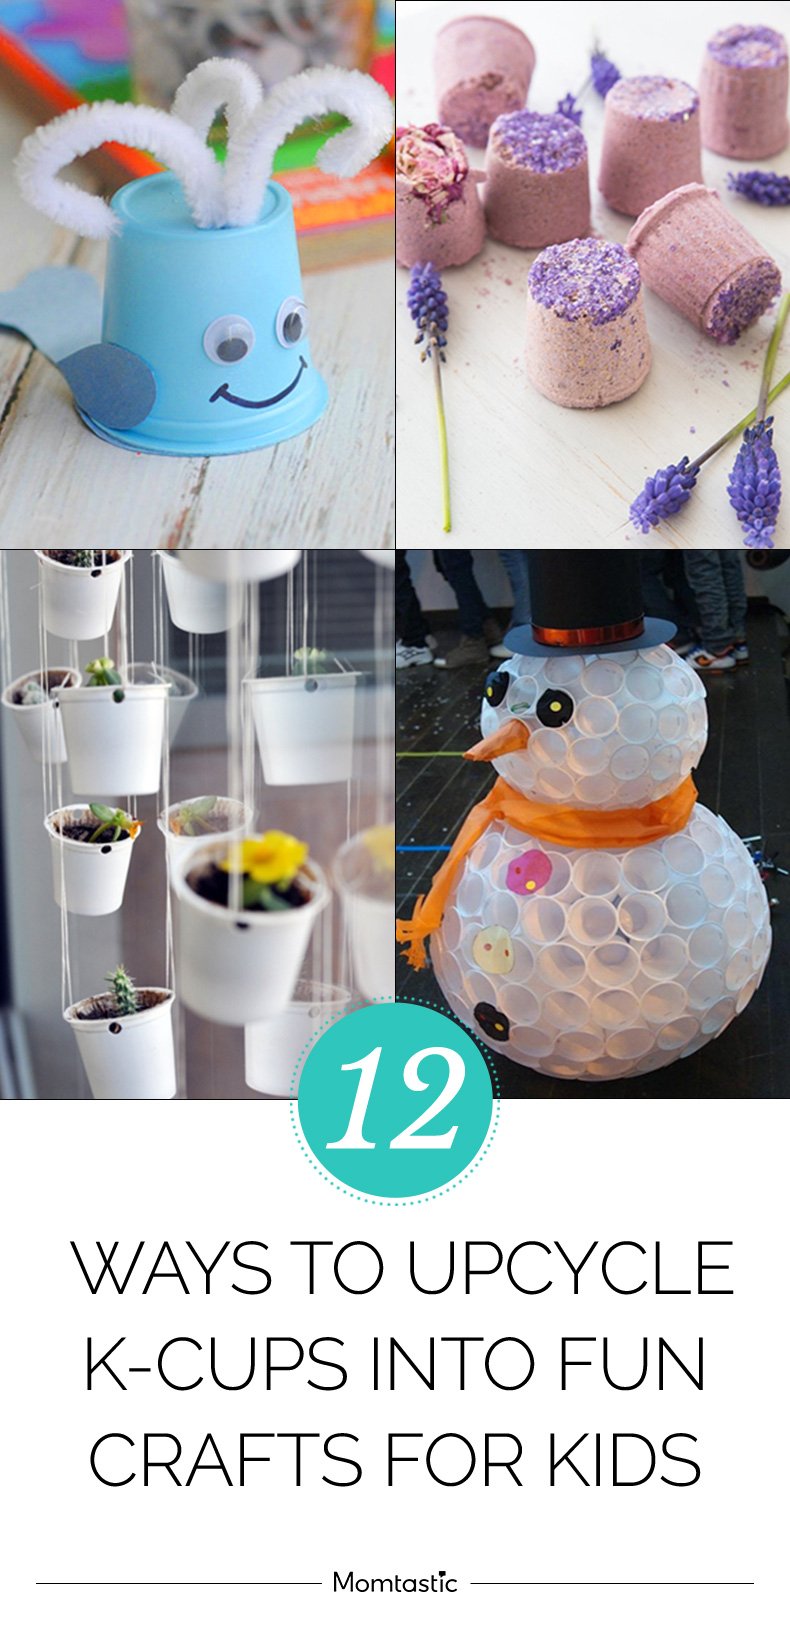 12 Ways to Upcycle K-Cups Into Fun Crafts for Kids